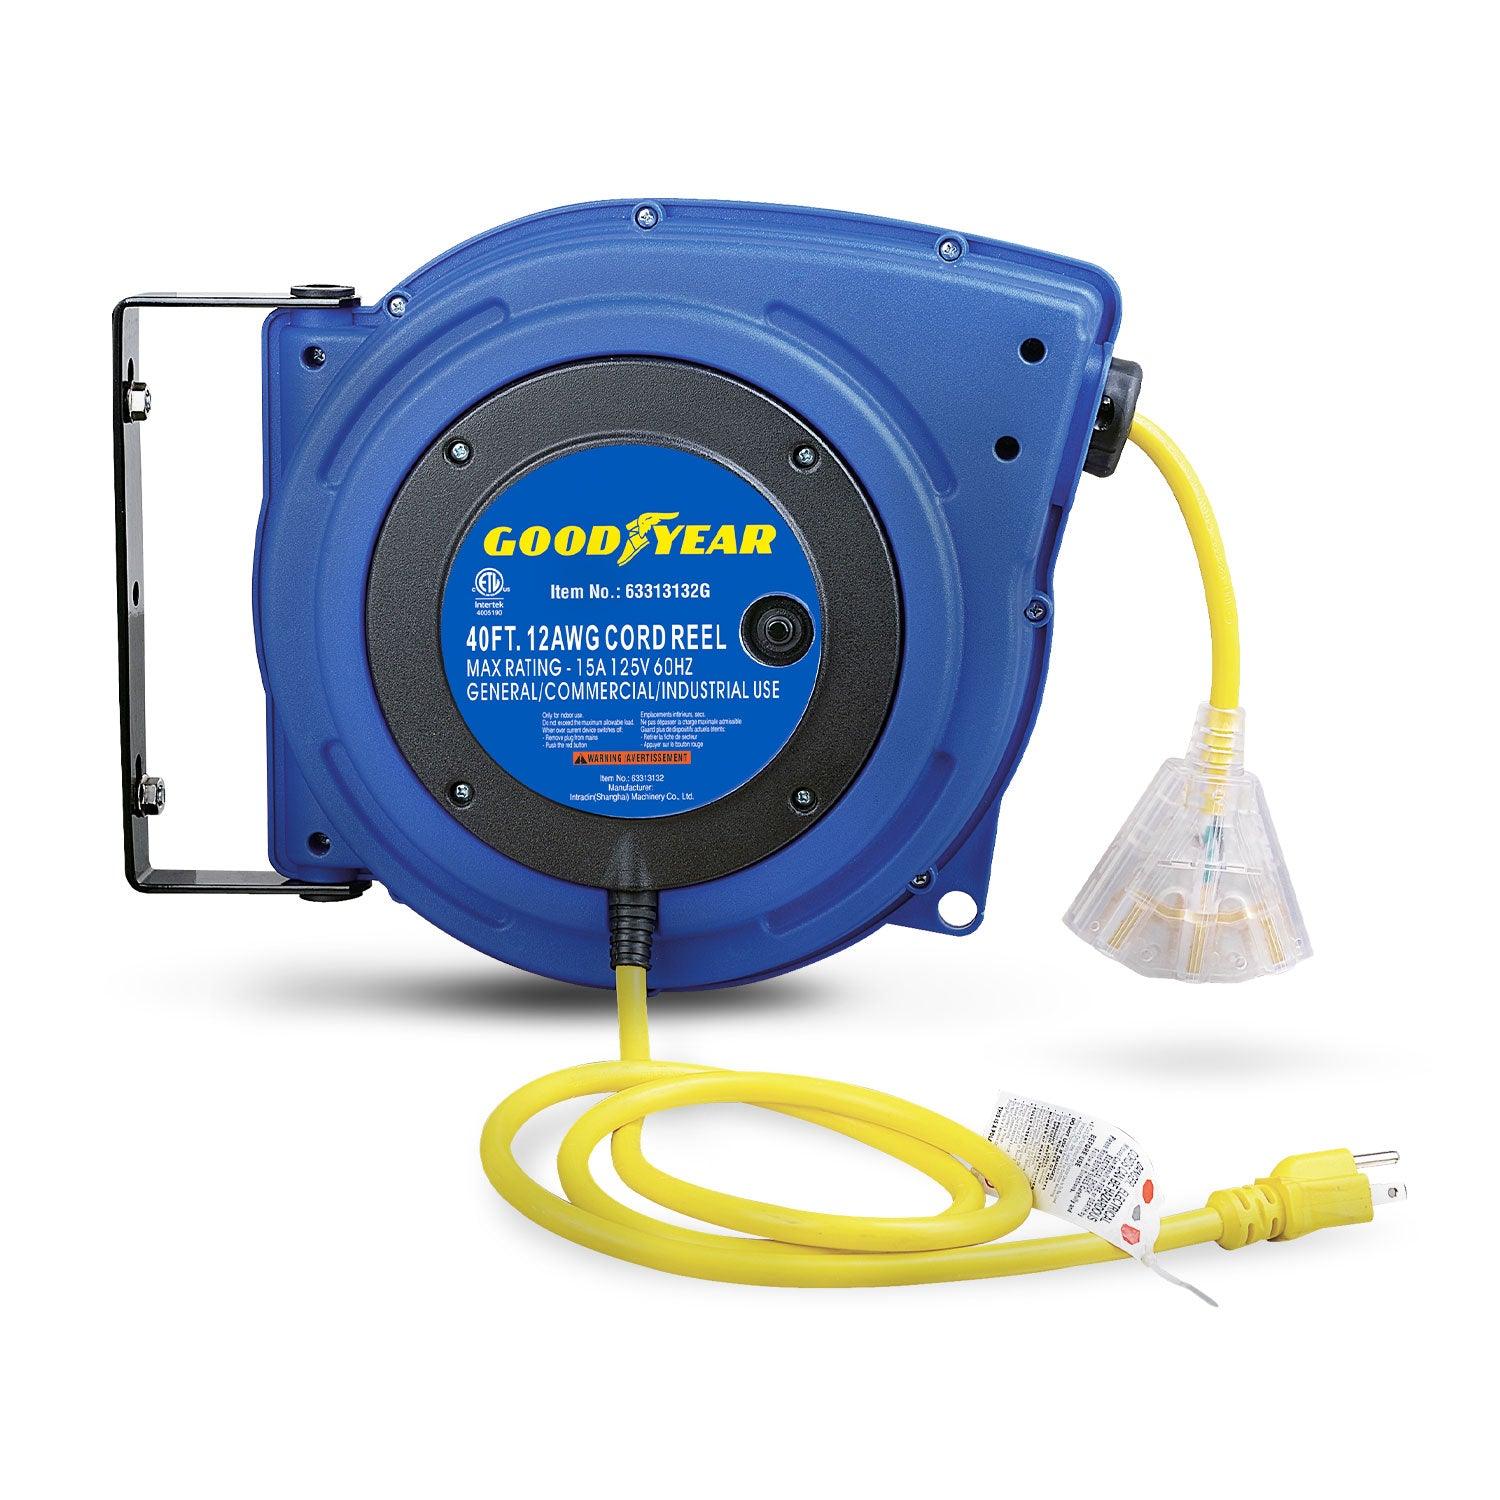 Goodyear Extension Cord Reel - 12AWG x 40' Ft, 3 Grounded Outlets, Max